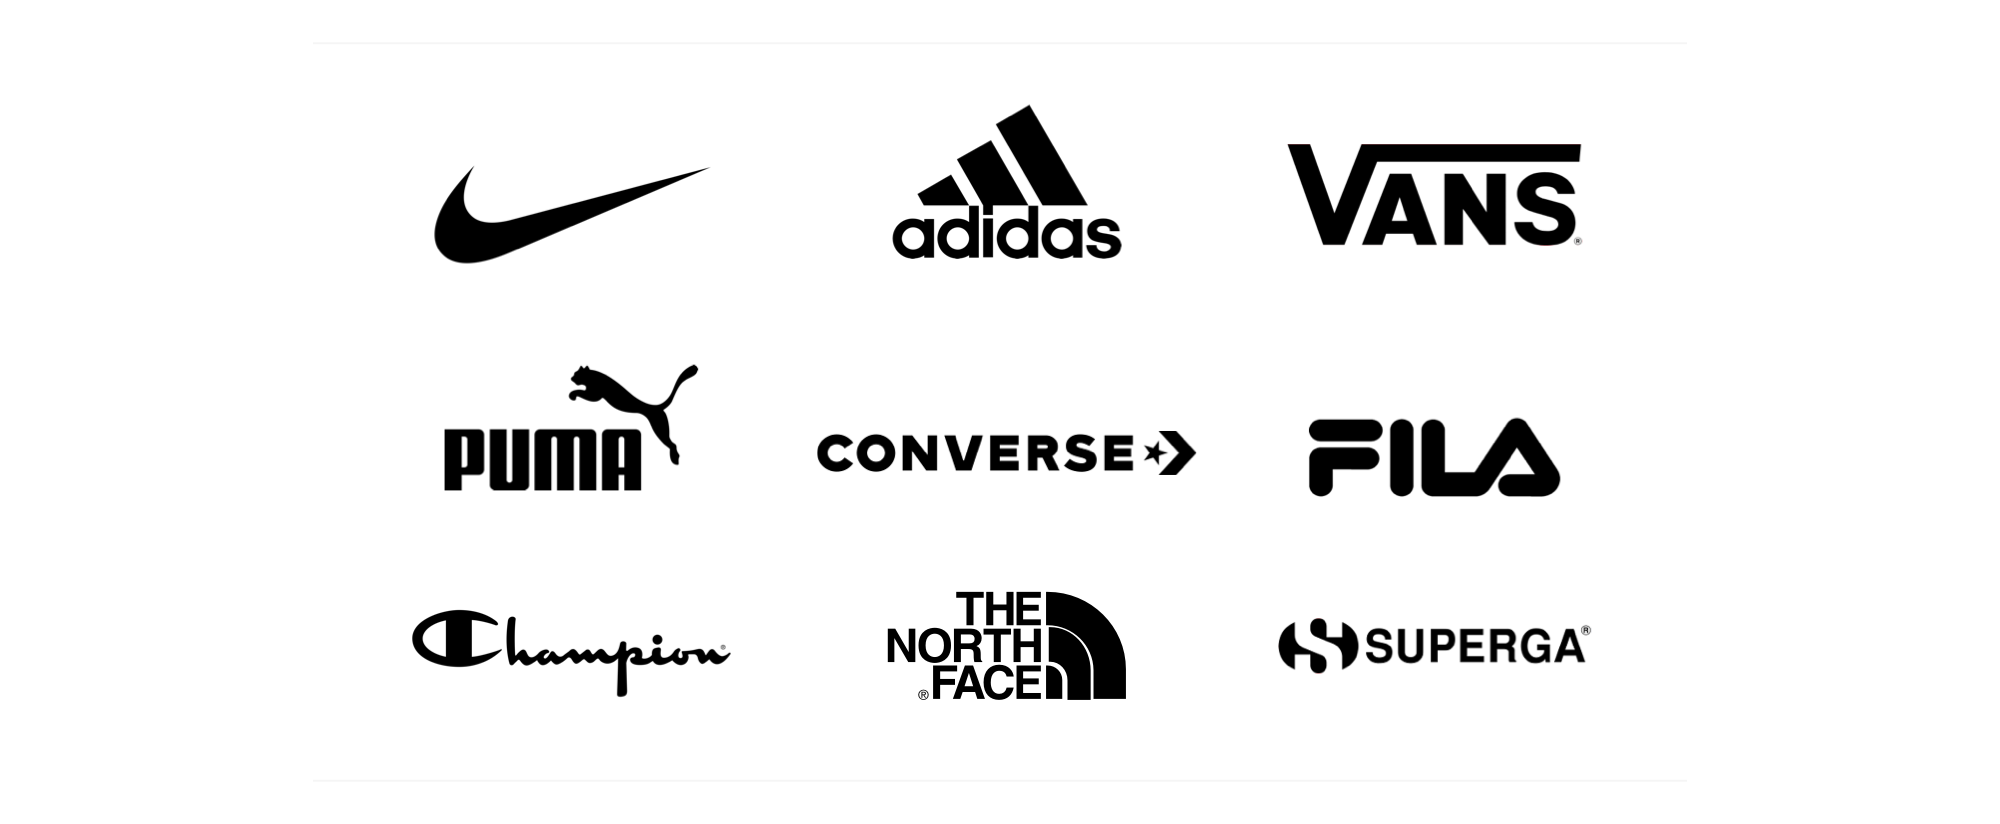 Our brands